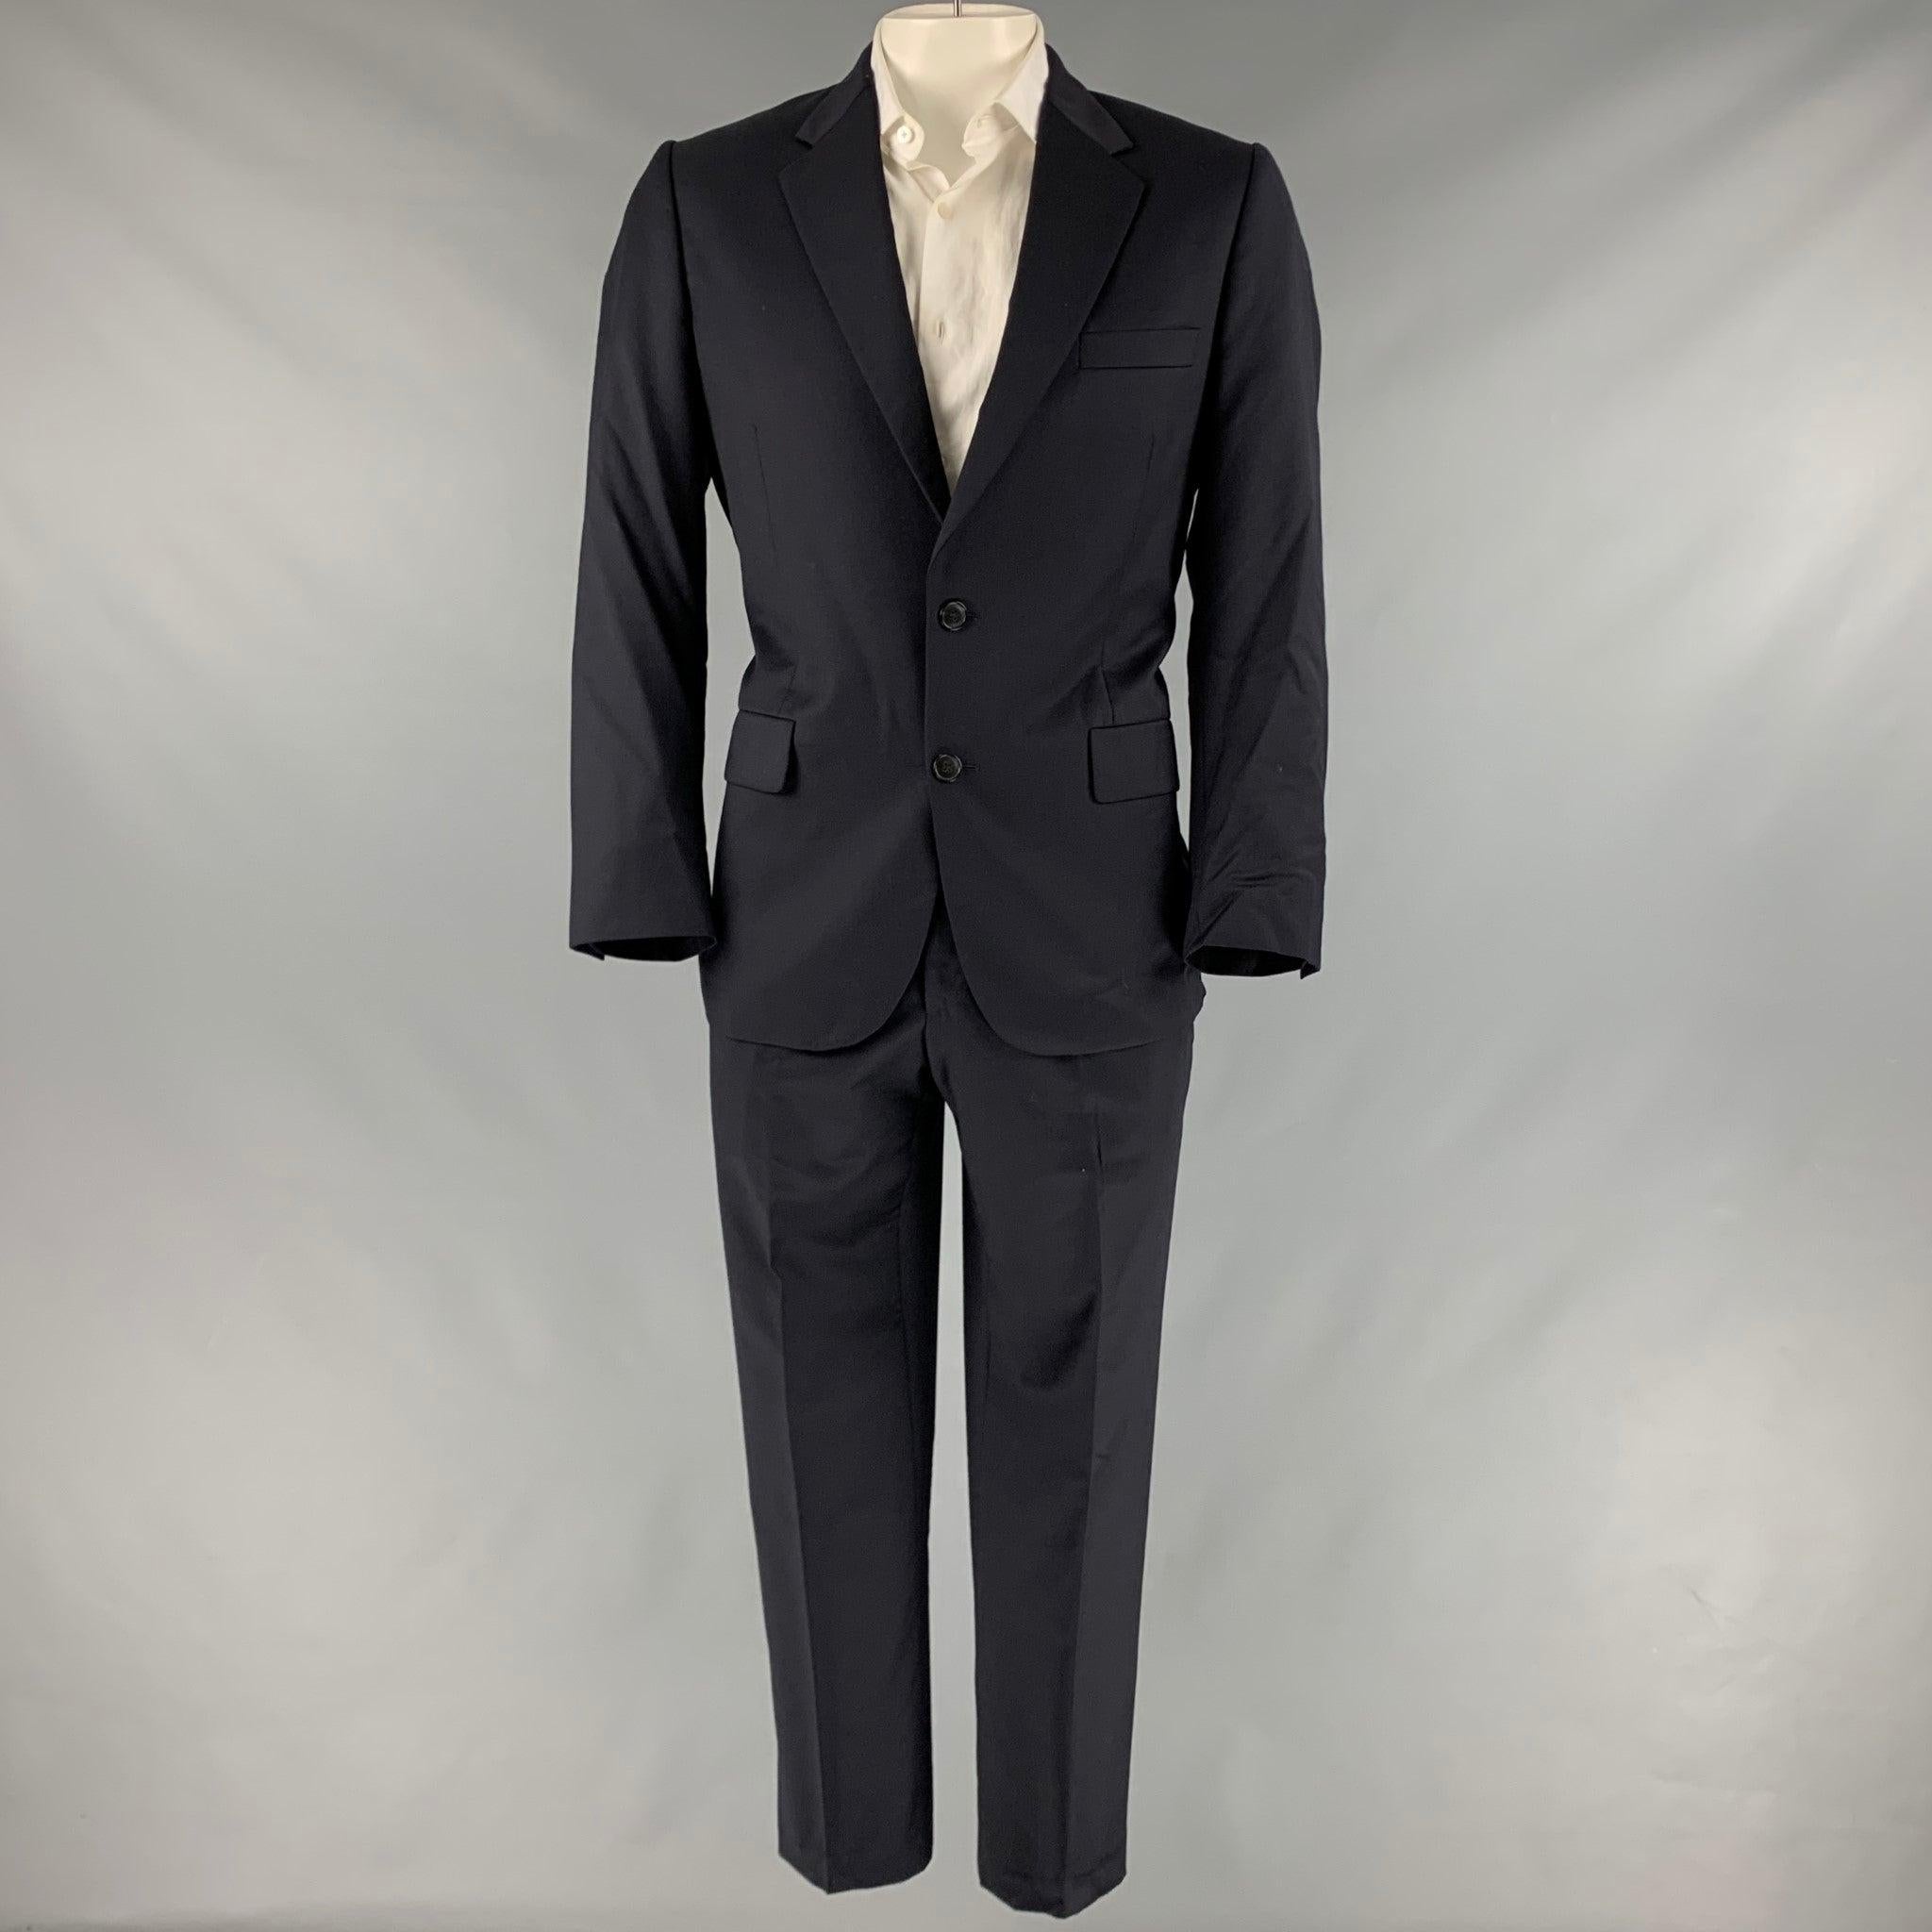 PAUL SMITH suit
in a navy wool cashmere with a full liner and includes a single breasted, double button sport coat with notch lapel and matching flat front trousers. Made in Italy.Very Good Pre-Owned Condition. Minor mark on back. 

Marked:   42R